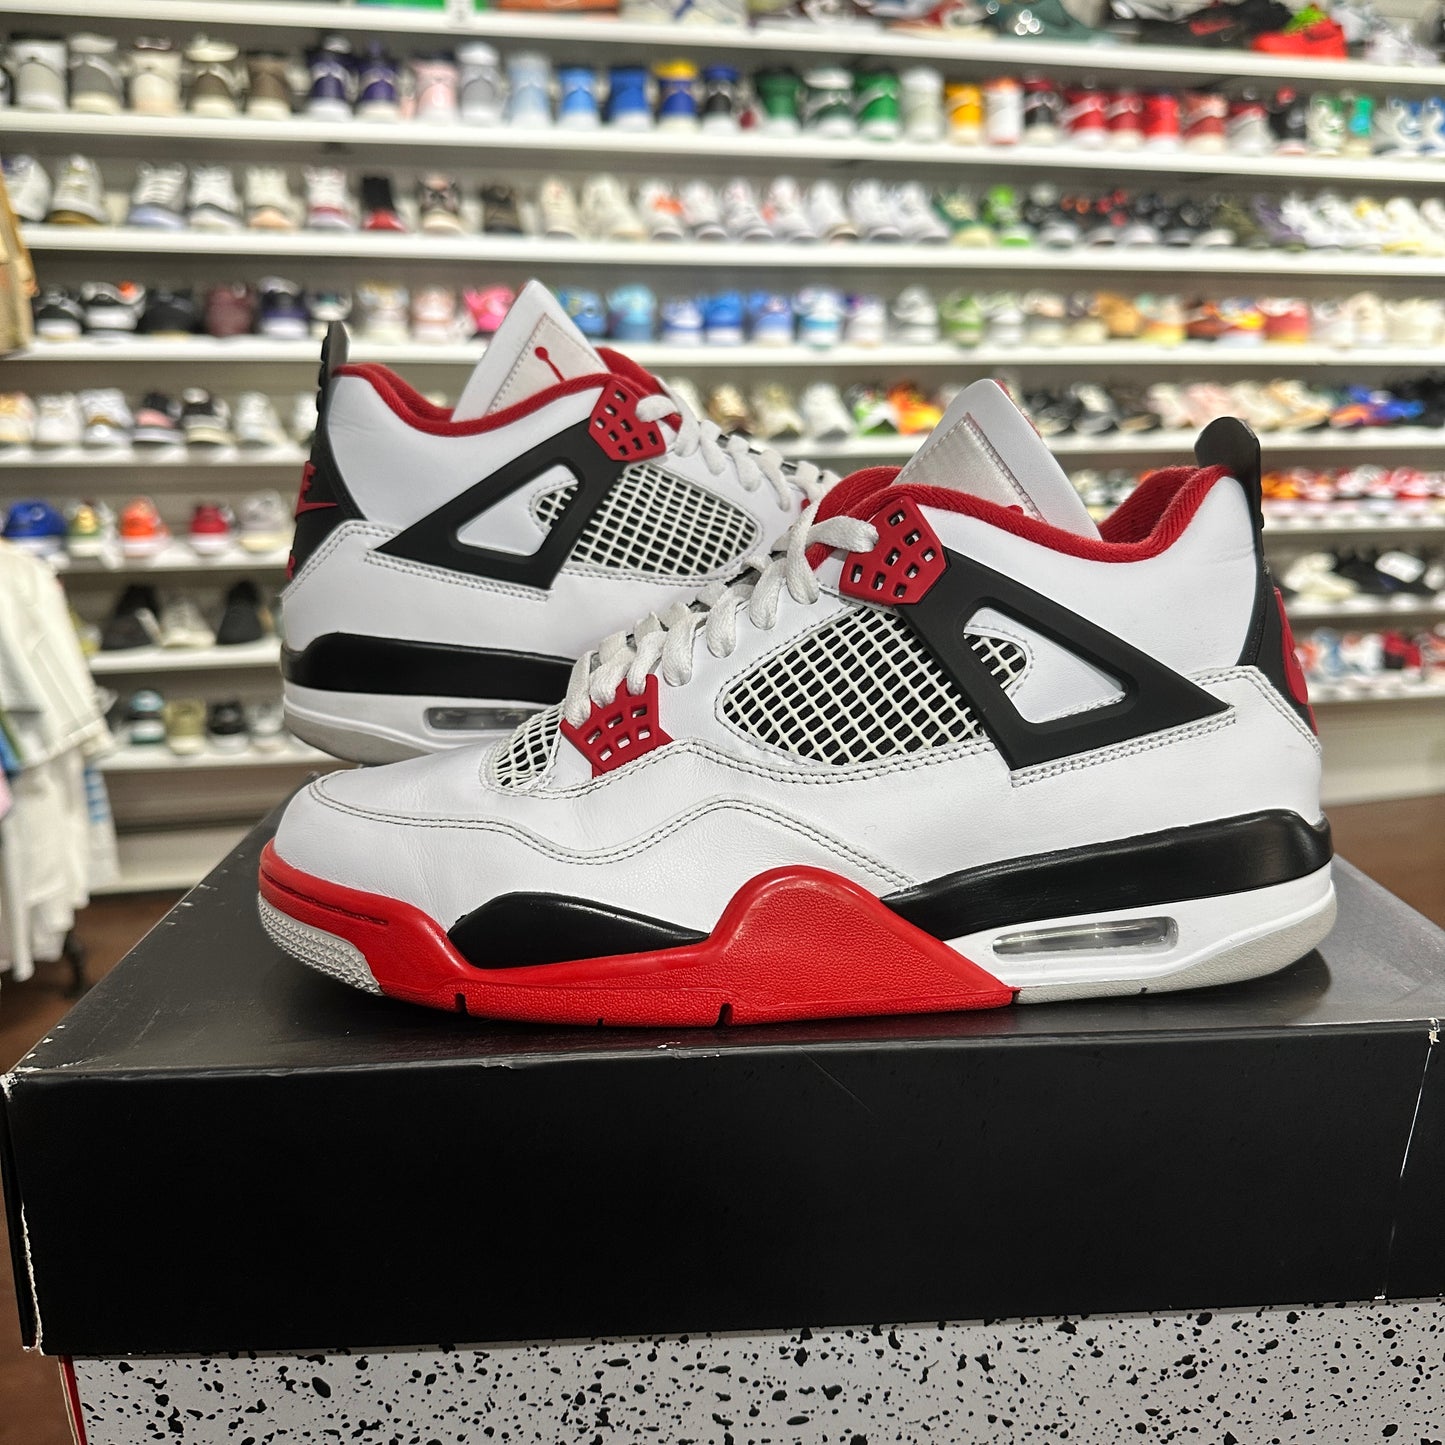 *USED* Air Jordan 4 Fire Red (size 9.5)